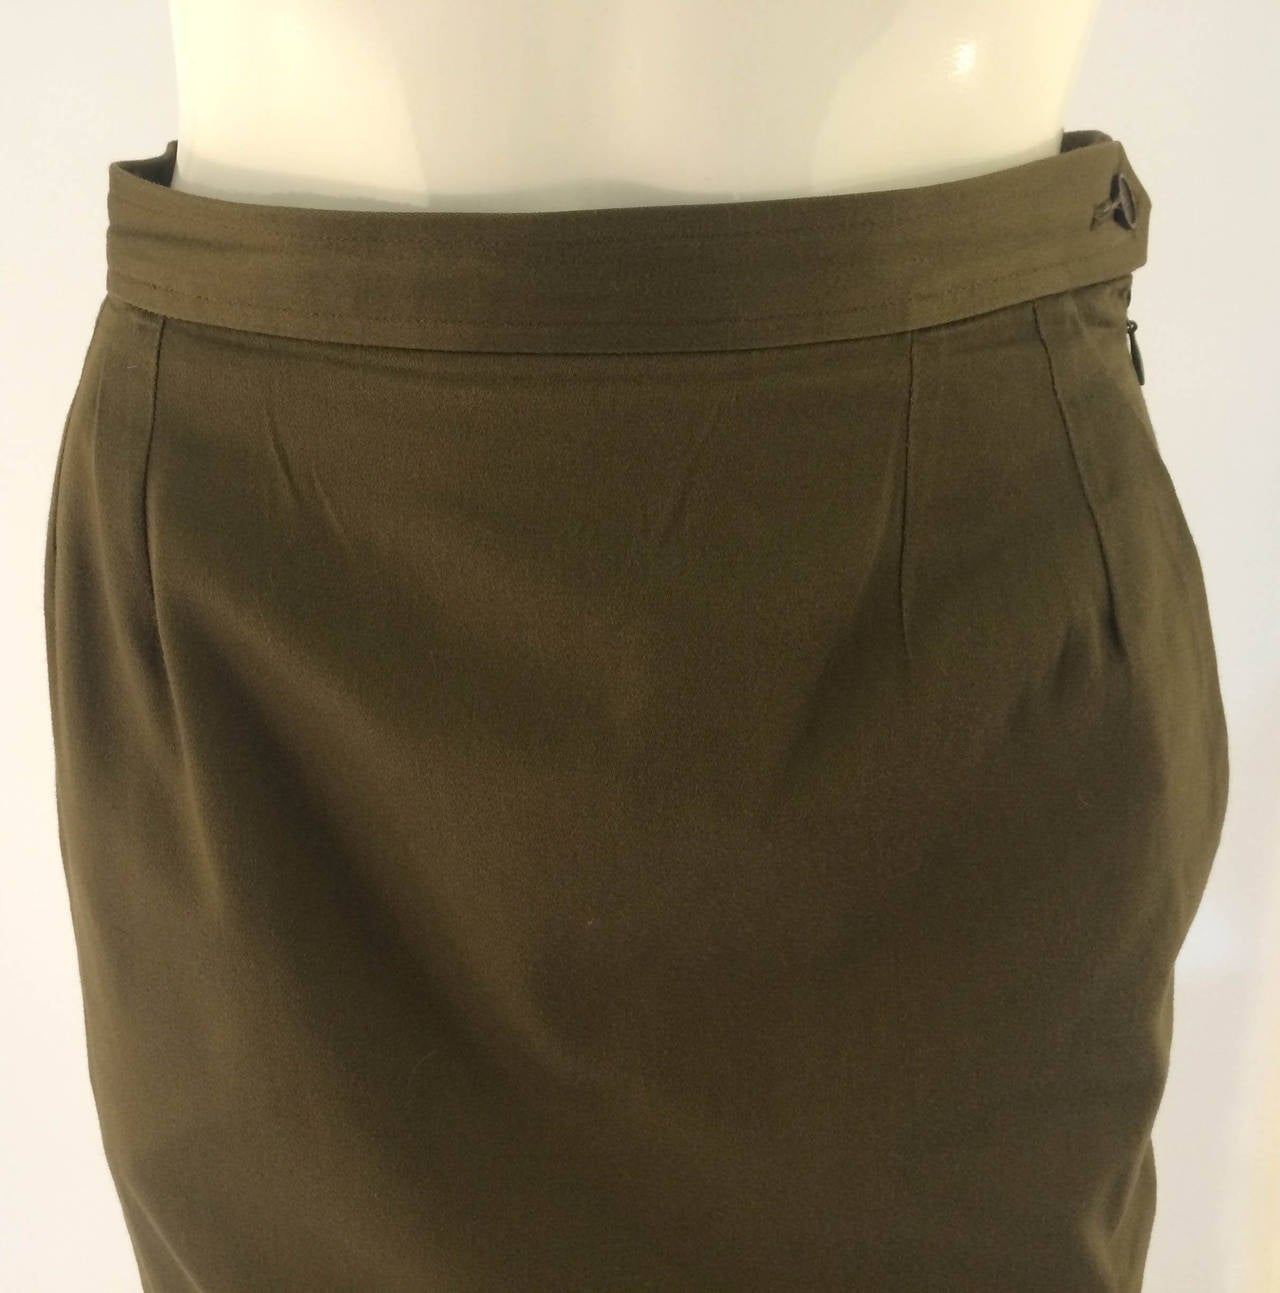 Yves Saint Laurent Pencil Skirt - 1980s In Excellent Condition In London, Chelsea